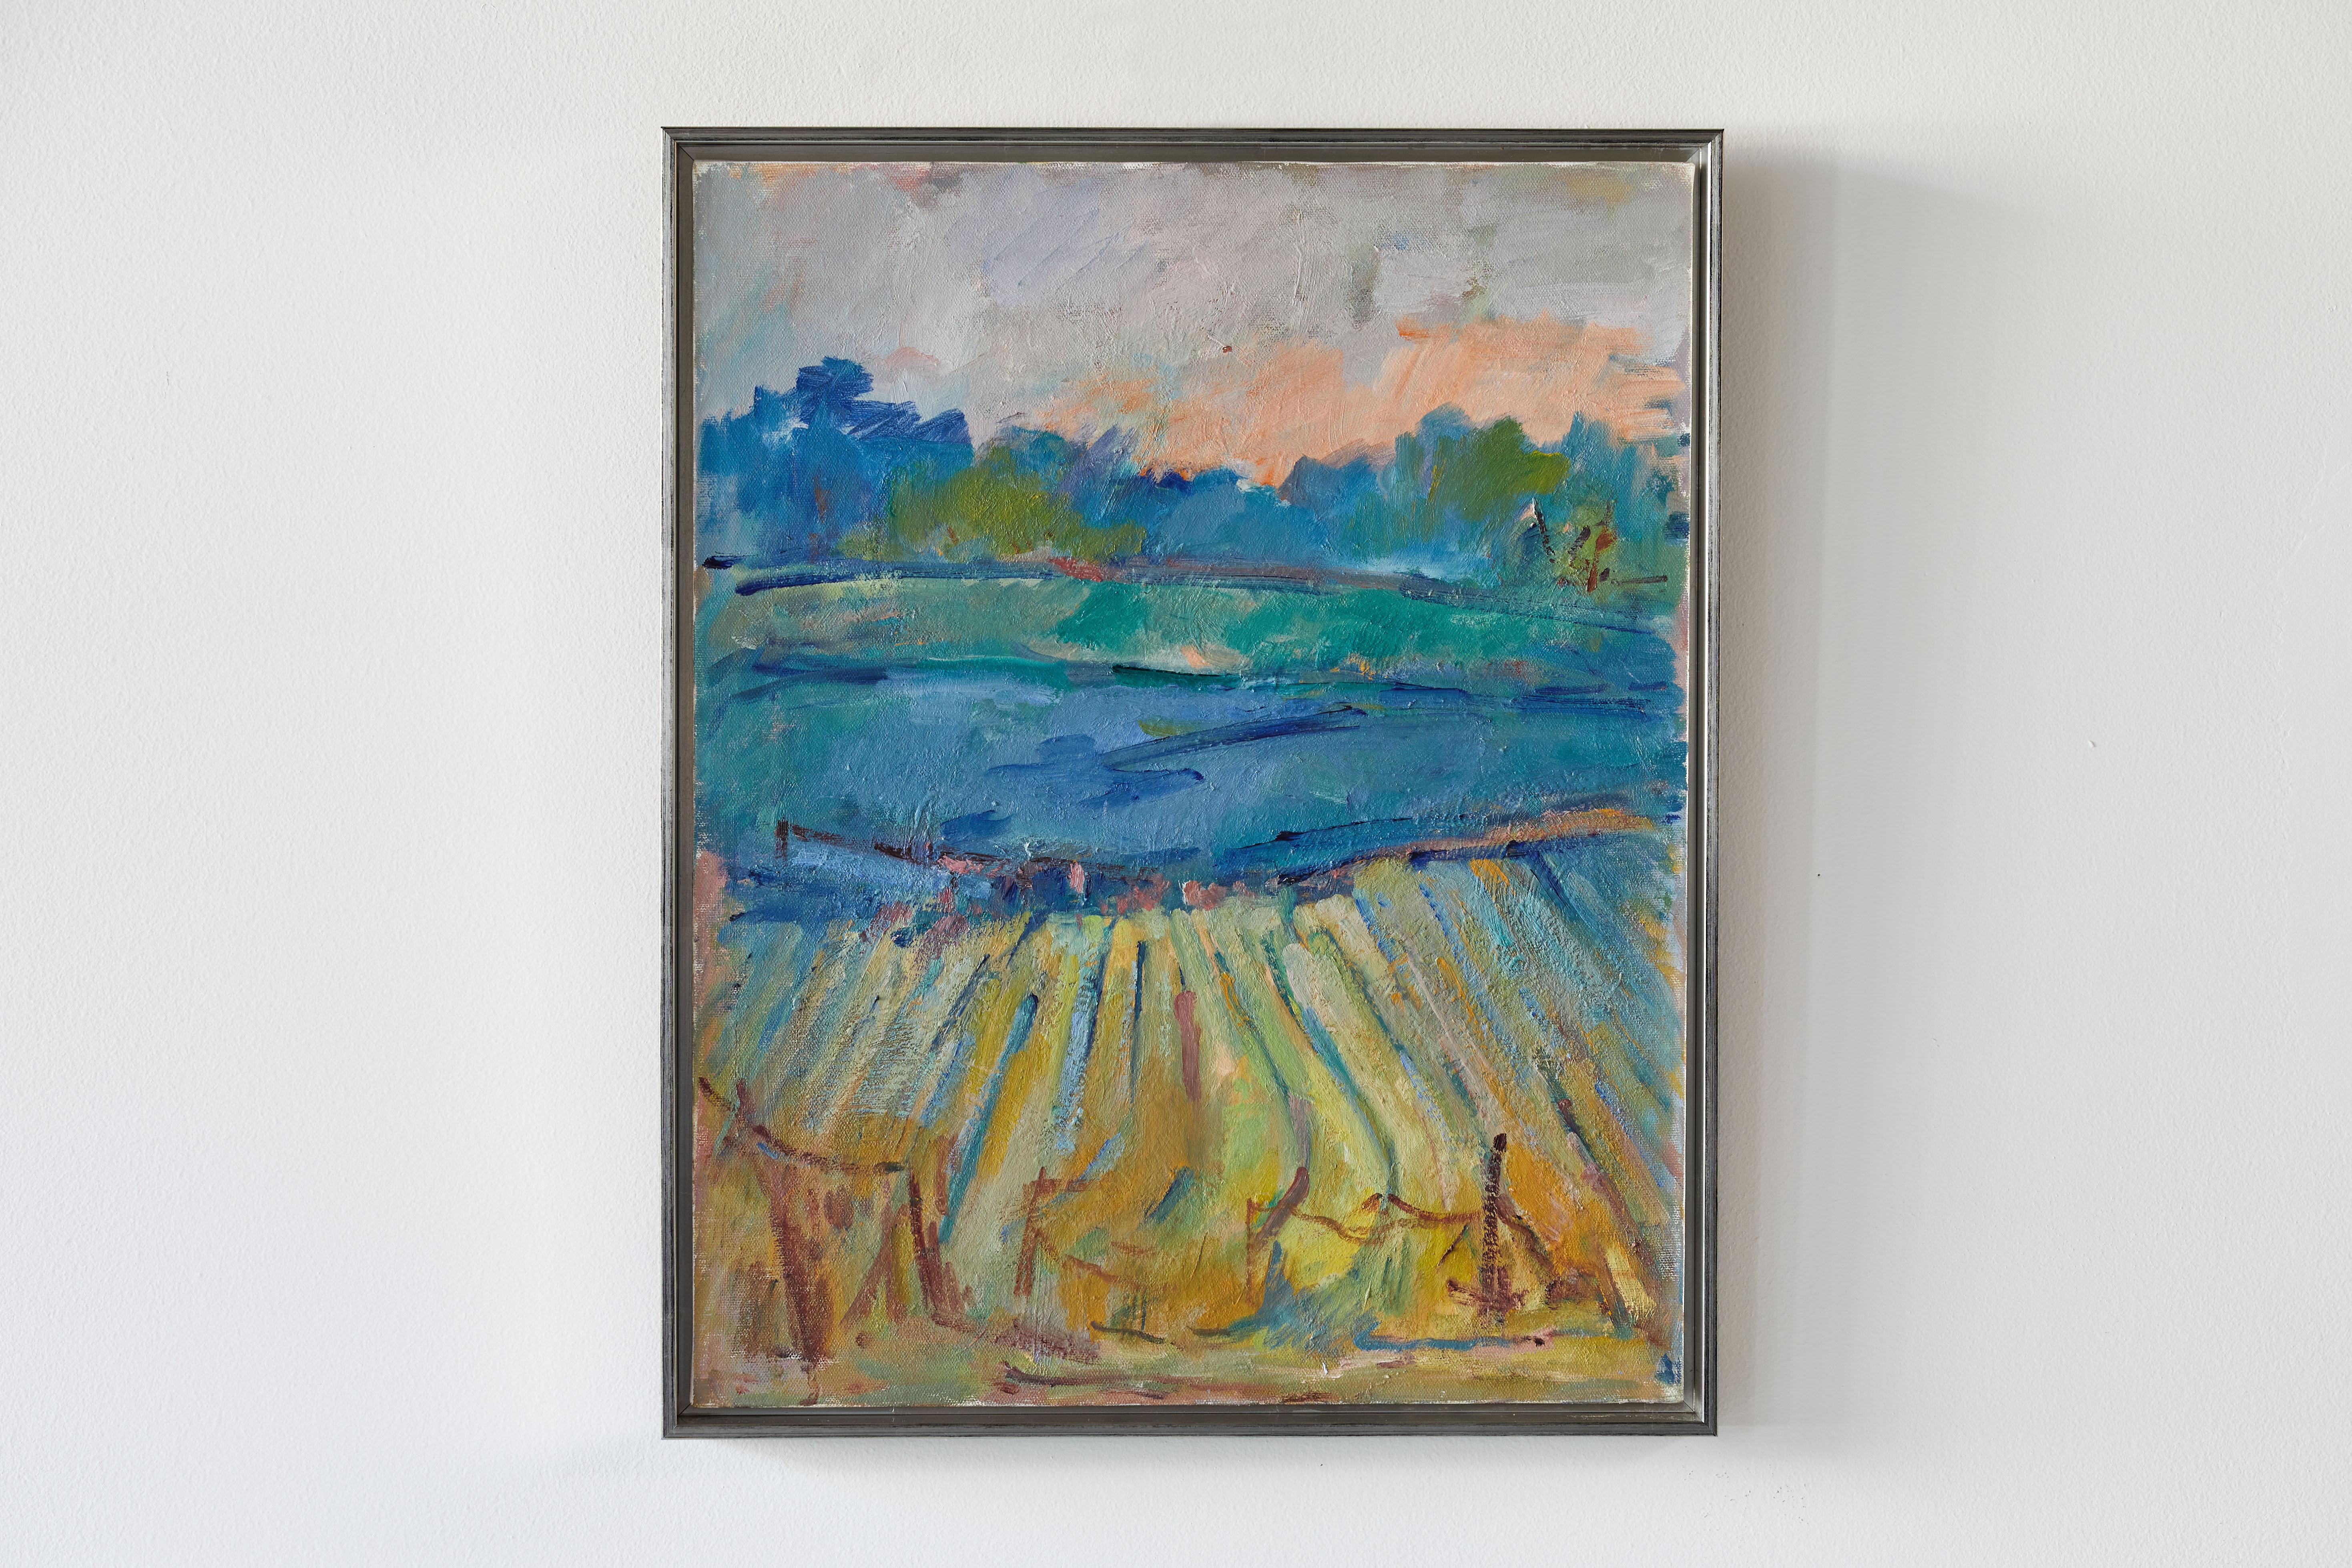 French colorful painting of the countryside with hues of blues, yellows, pinks. The painting is newly framed in a silver frame.